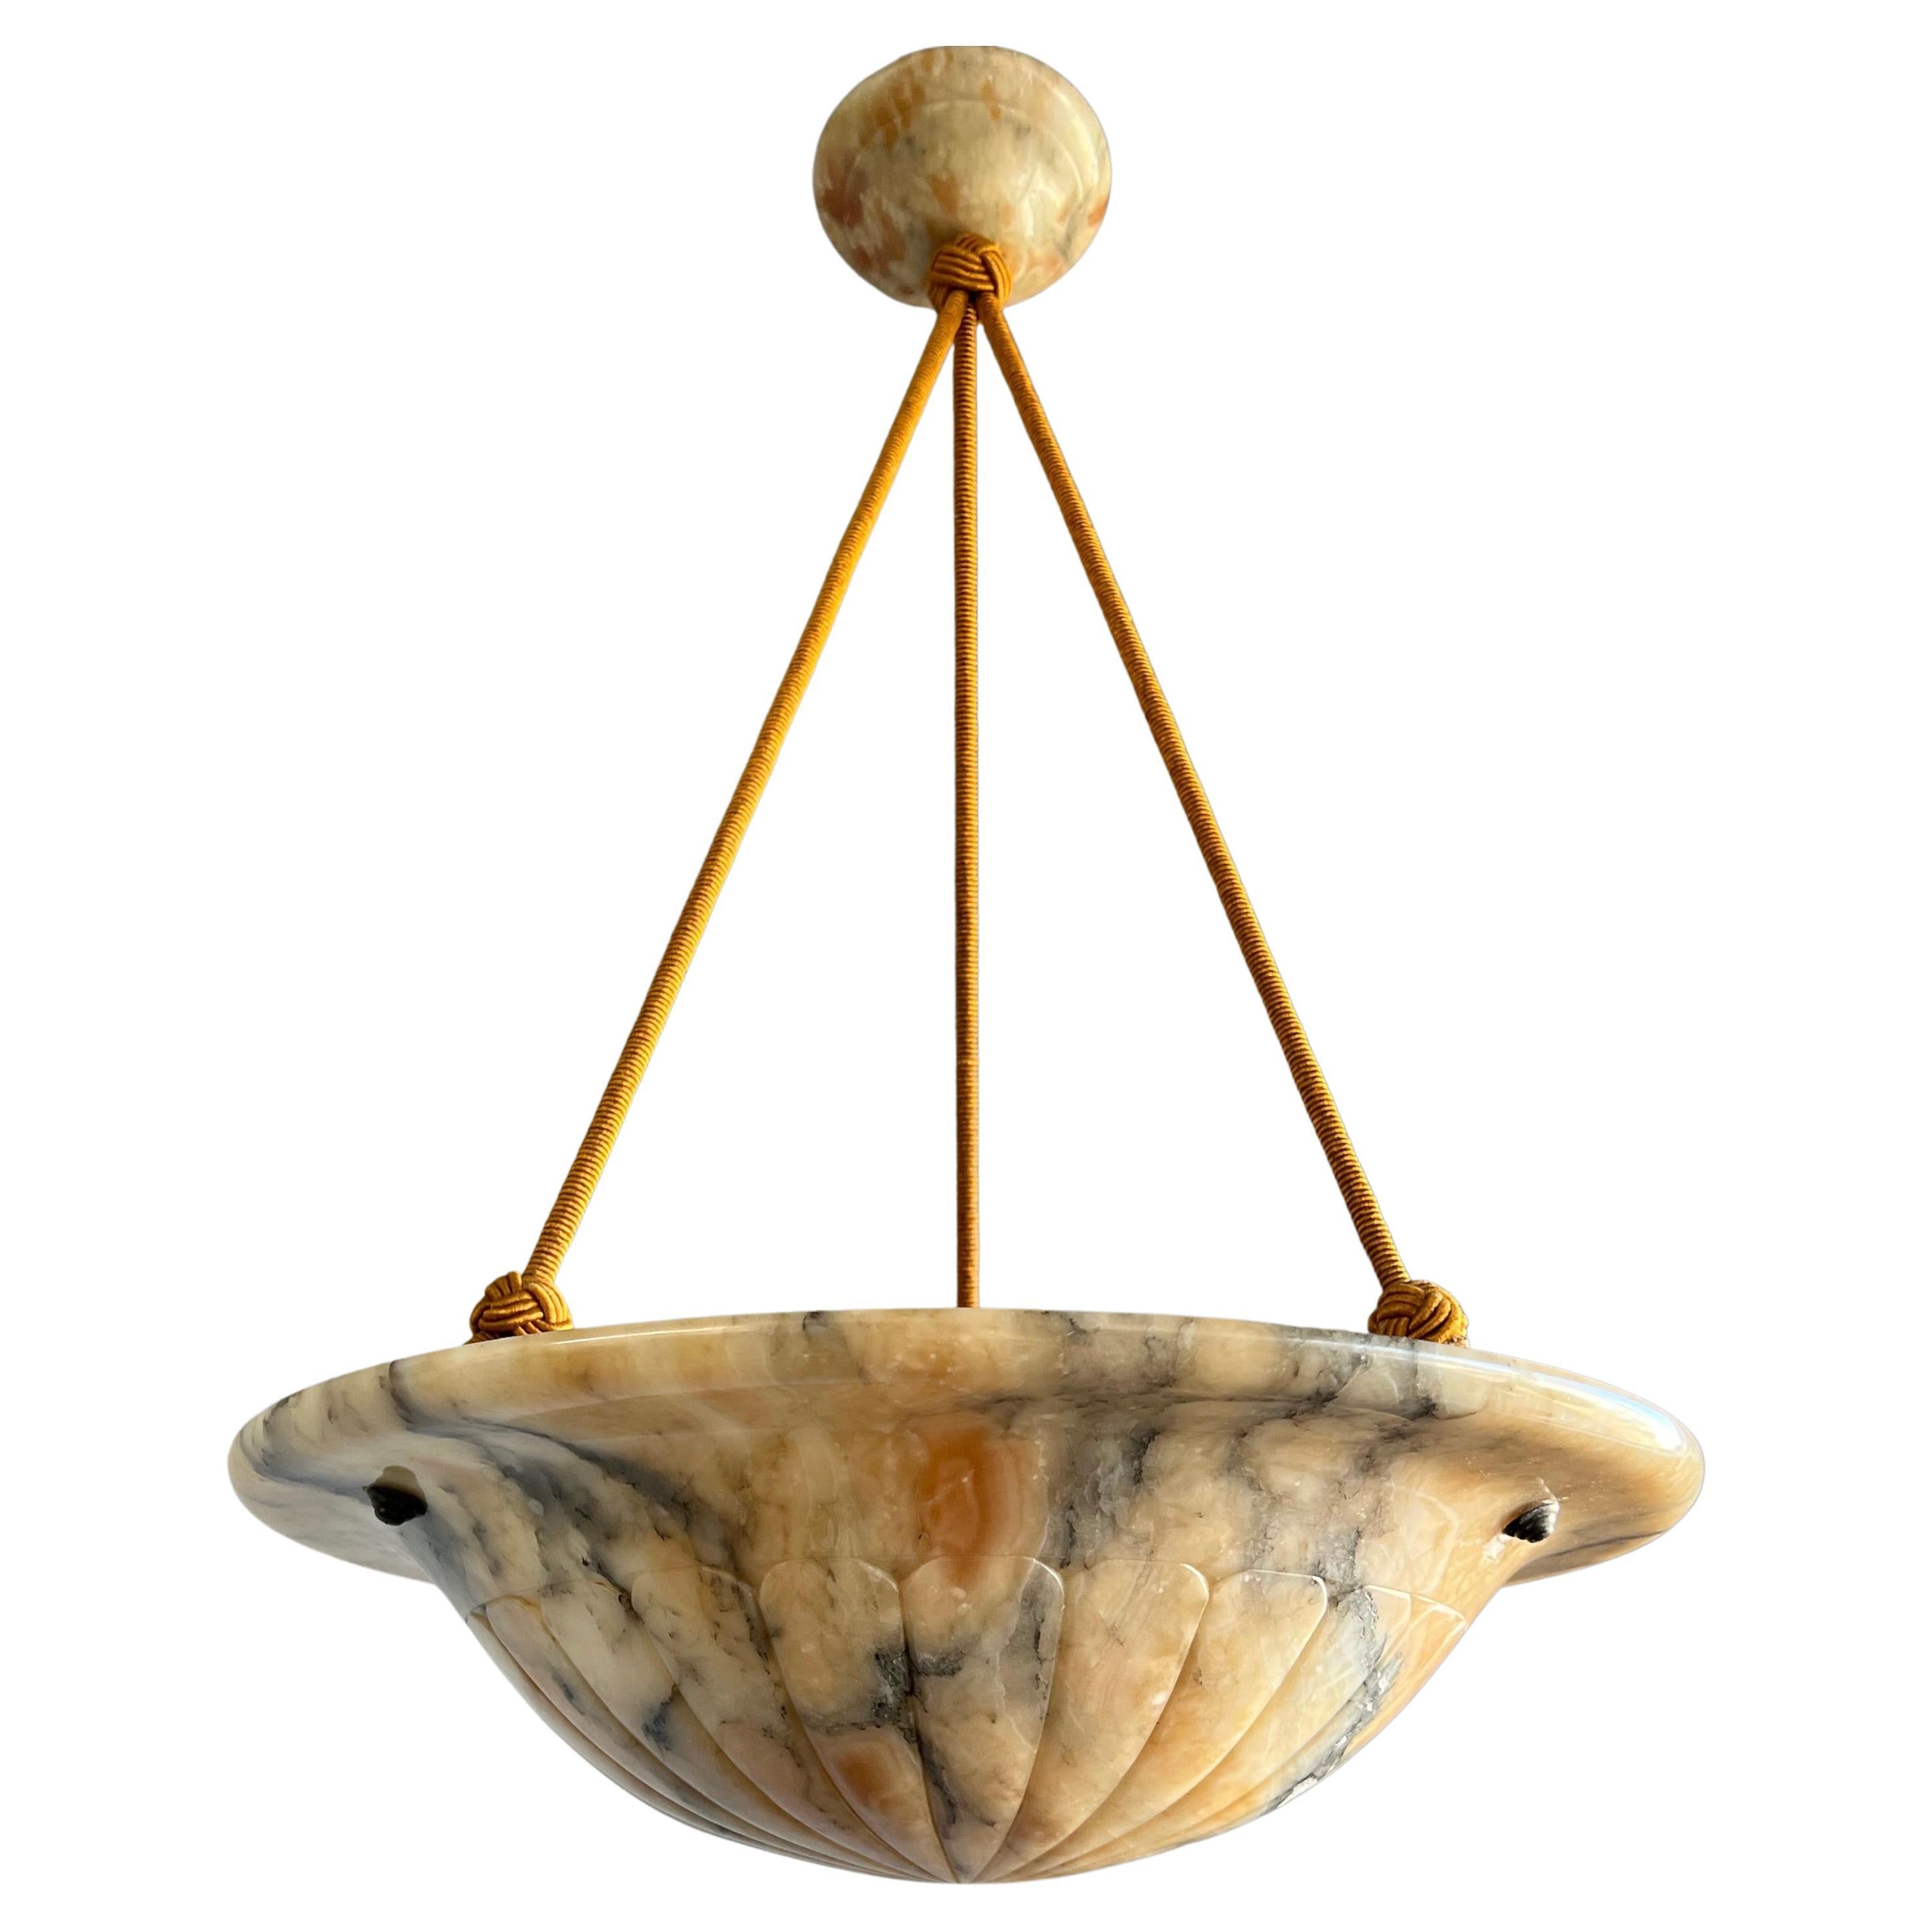 Large and unique top quality, mint condition alabaster chandelier with amber colored patches / clouds. 

One of the qualities of alabaster pendants is that no two shades will ever be exactly the same. Mother Nature created this mineral stone over